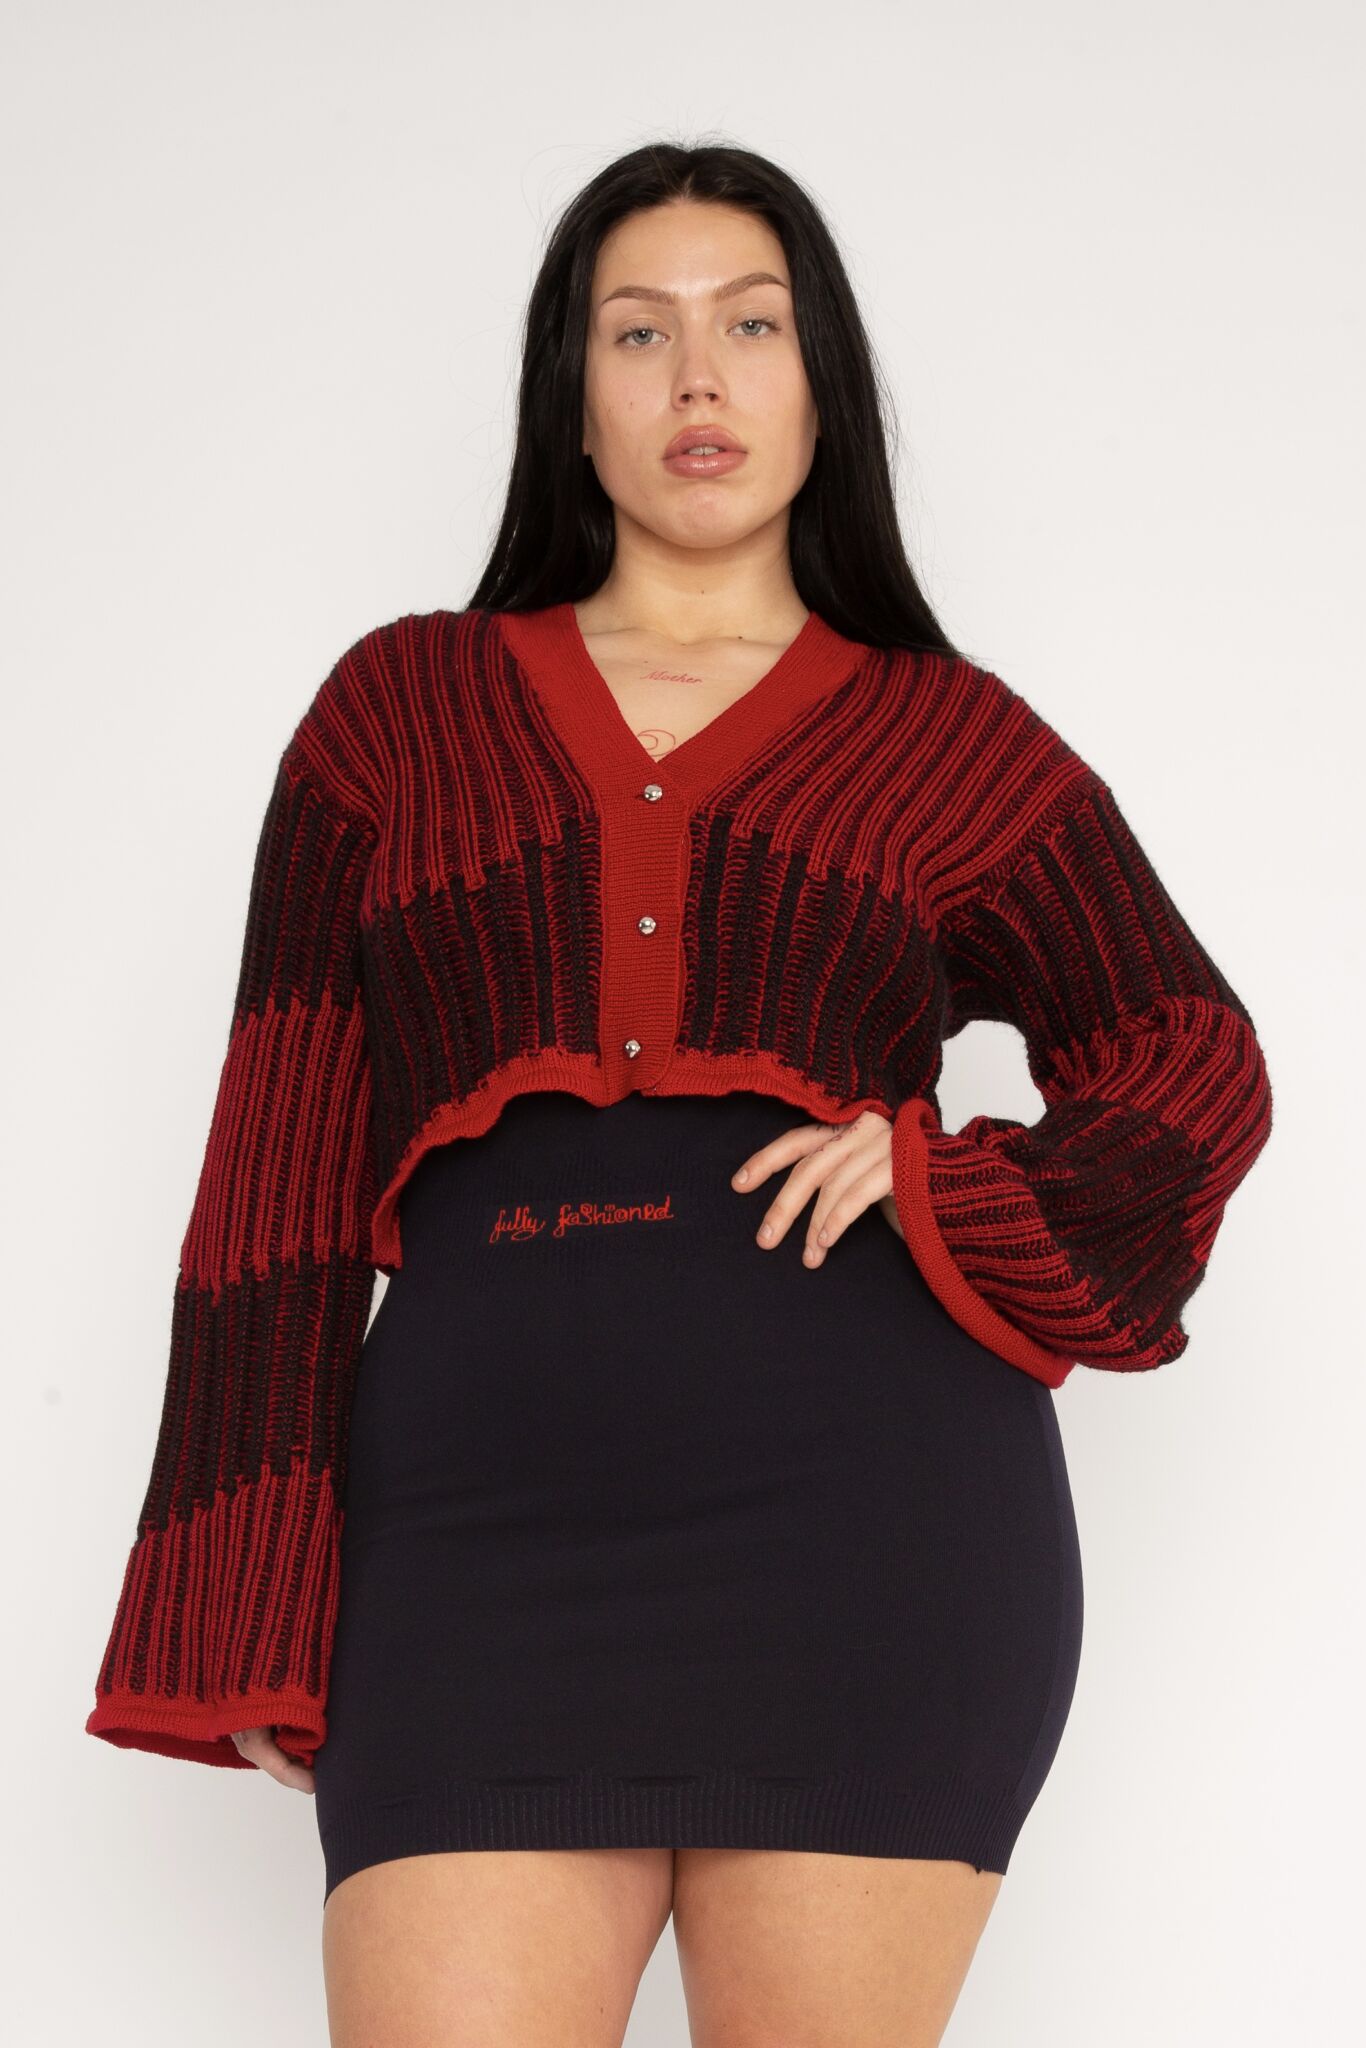 Wavy Wool Cardigan in red and black is a knitted cropped mohair cardigan with flared sleeves and all-over wavy stripes. Detailed with a heart in the back. The cardigan has a ribbed V-shaped neckline, a three-button closure and is cut for a slightly loose fit. The textile is fluffy, non-itchy and comfortable against the skin. The Wavy Wool Cardigan is also available in turquoise and comes in 3 different sizes.